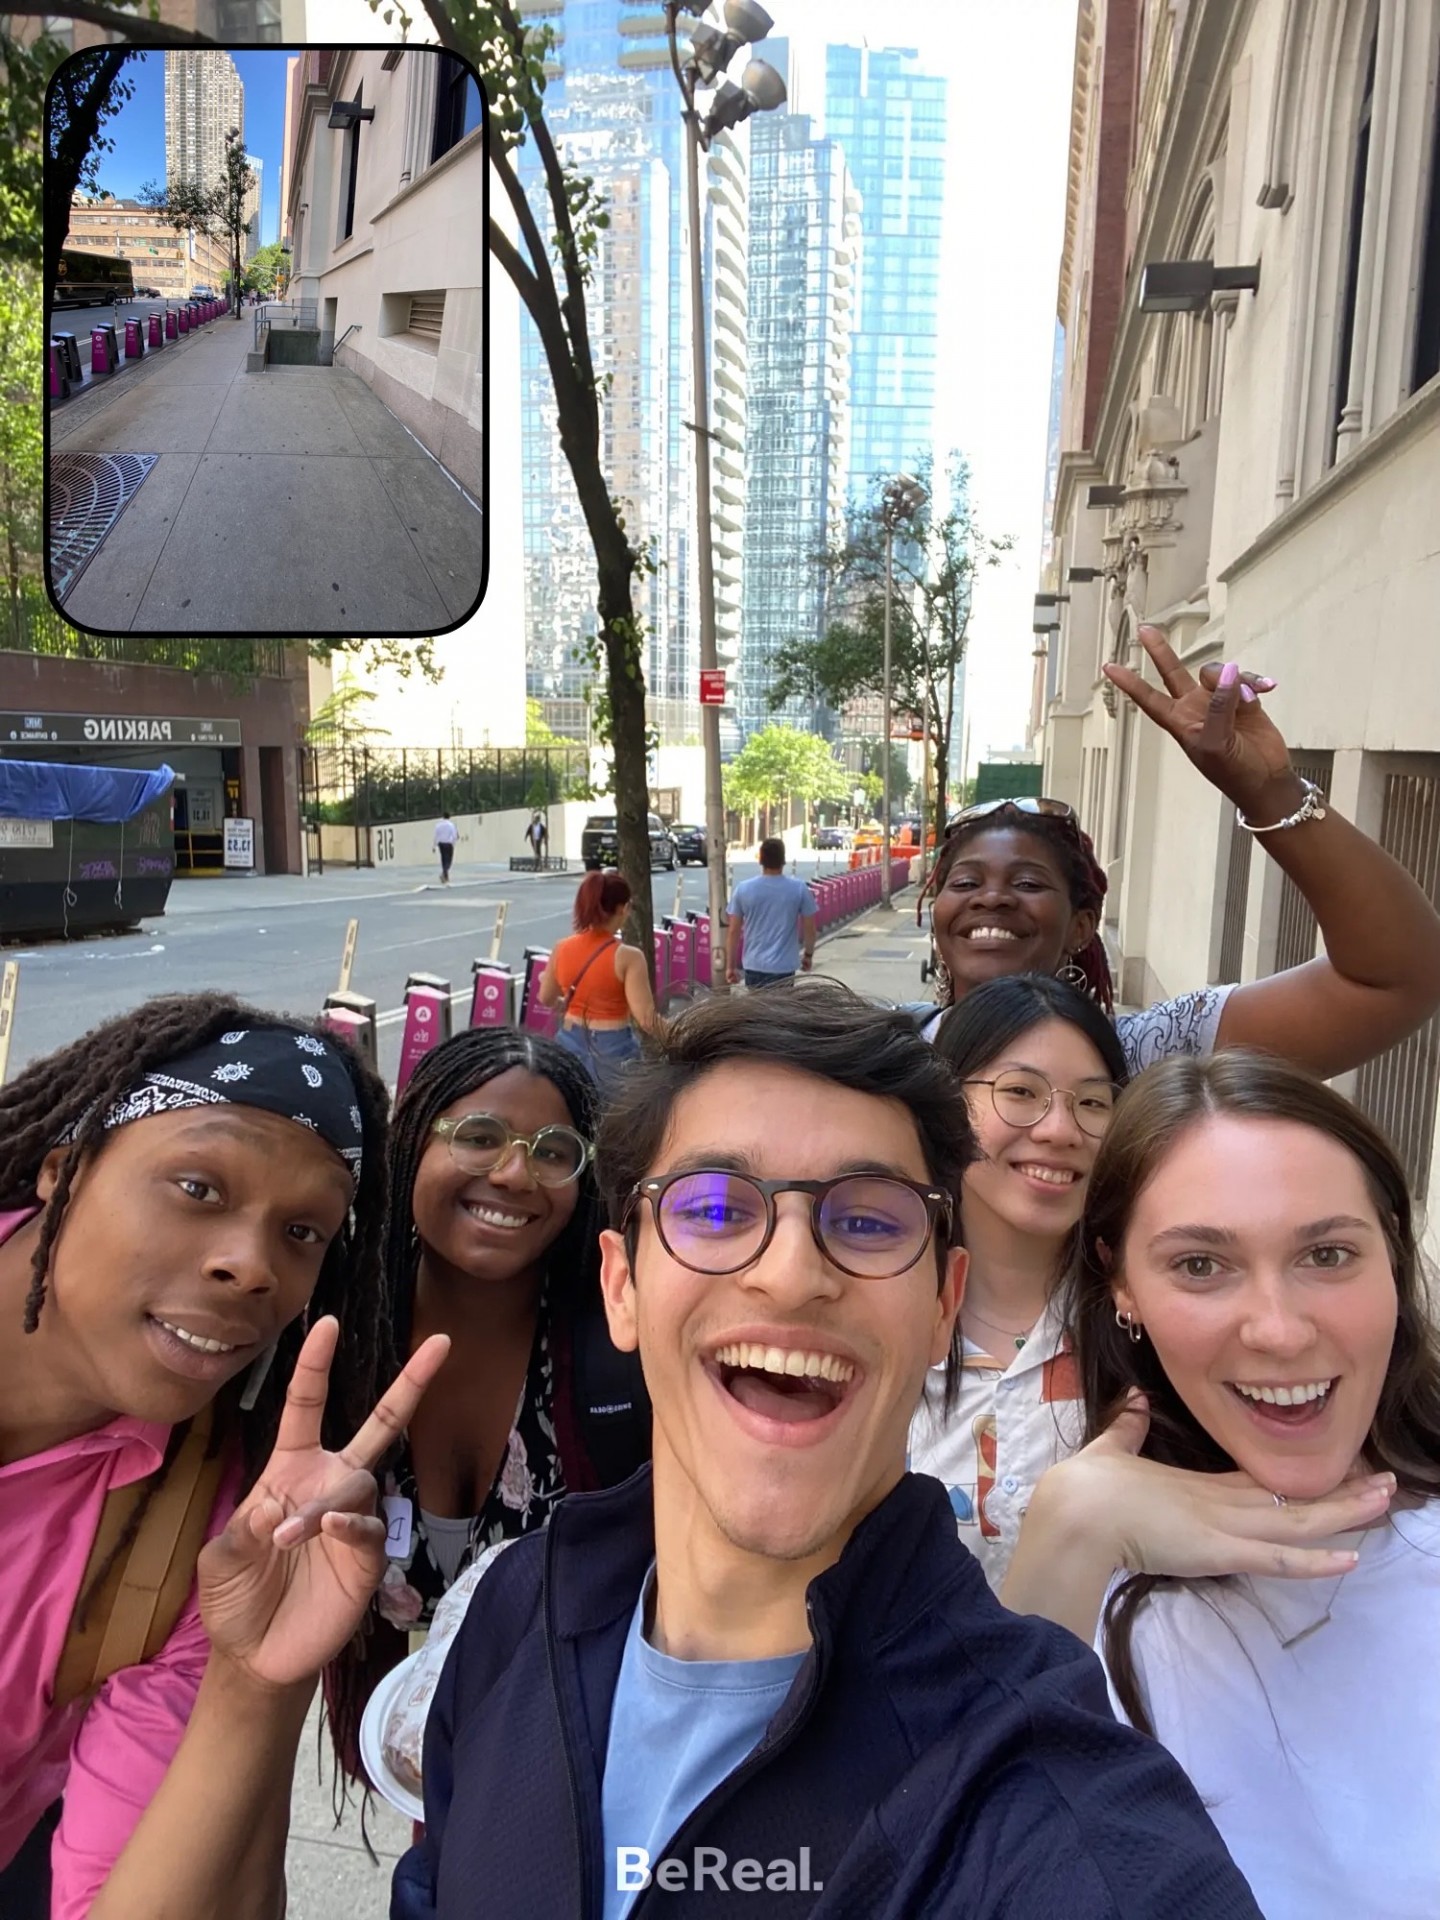 A picture of the 2023 Justice Lab Summer Fellows: Alford Young III, Denise Taveras, Ashwin Marathe, Ariel Yu, Claire Stalder, Lisette Bamenga (back). Not pictured: Daniela Palacios, Elizabeth Carpenter.